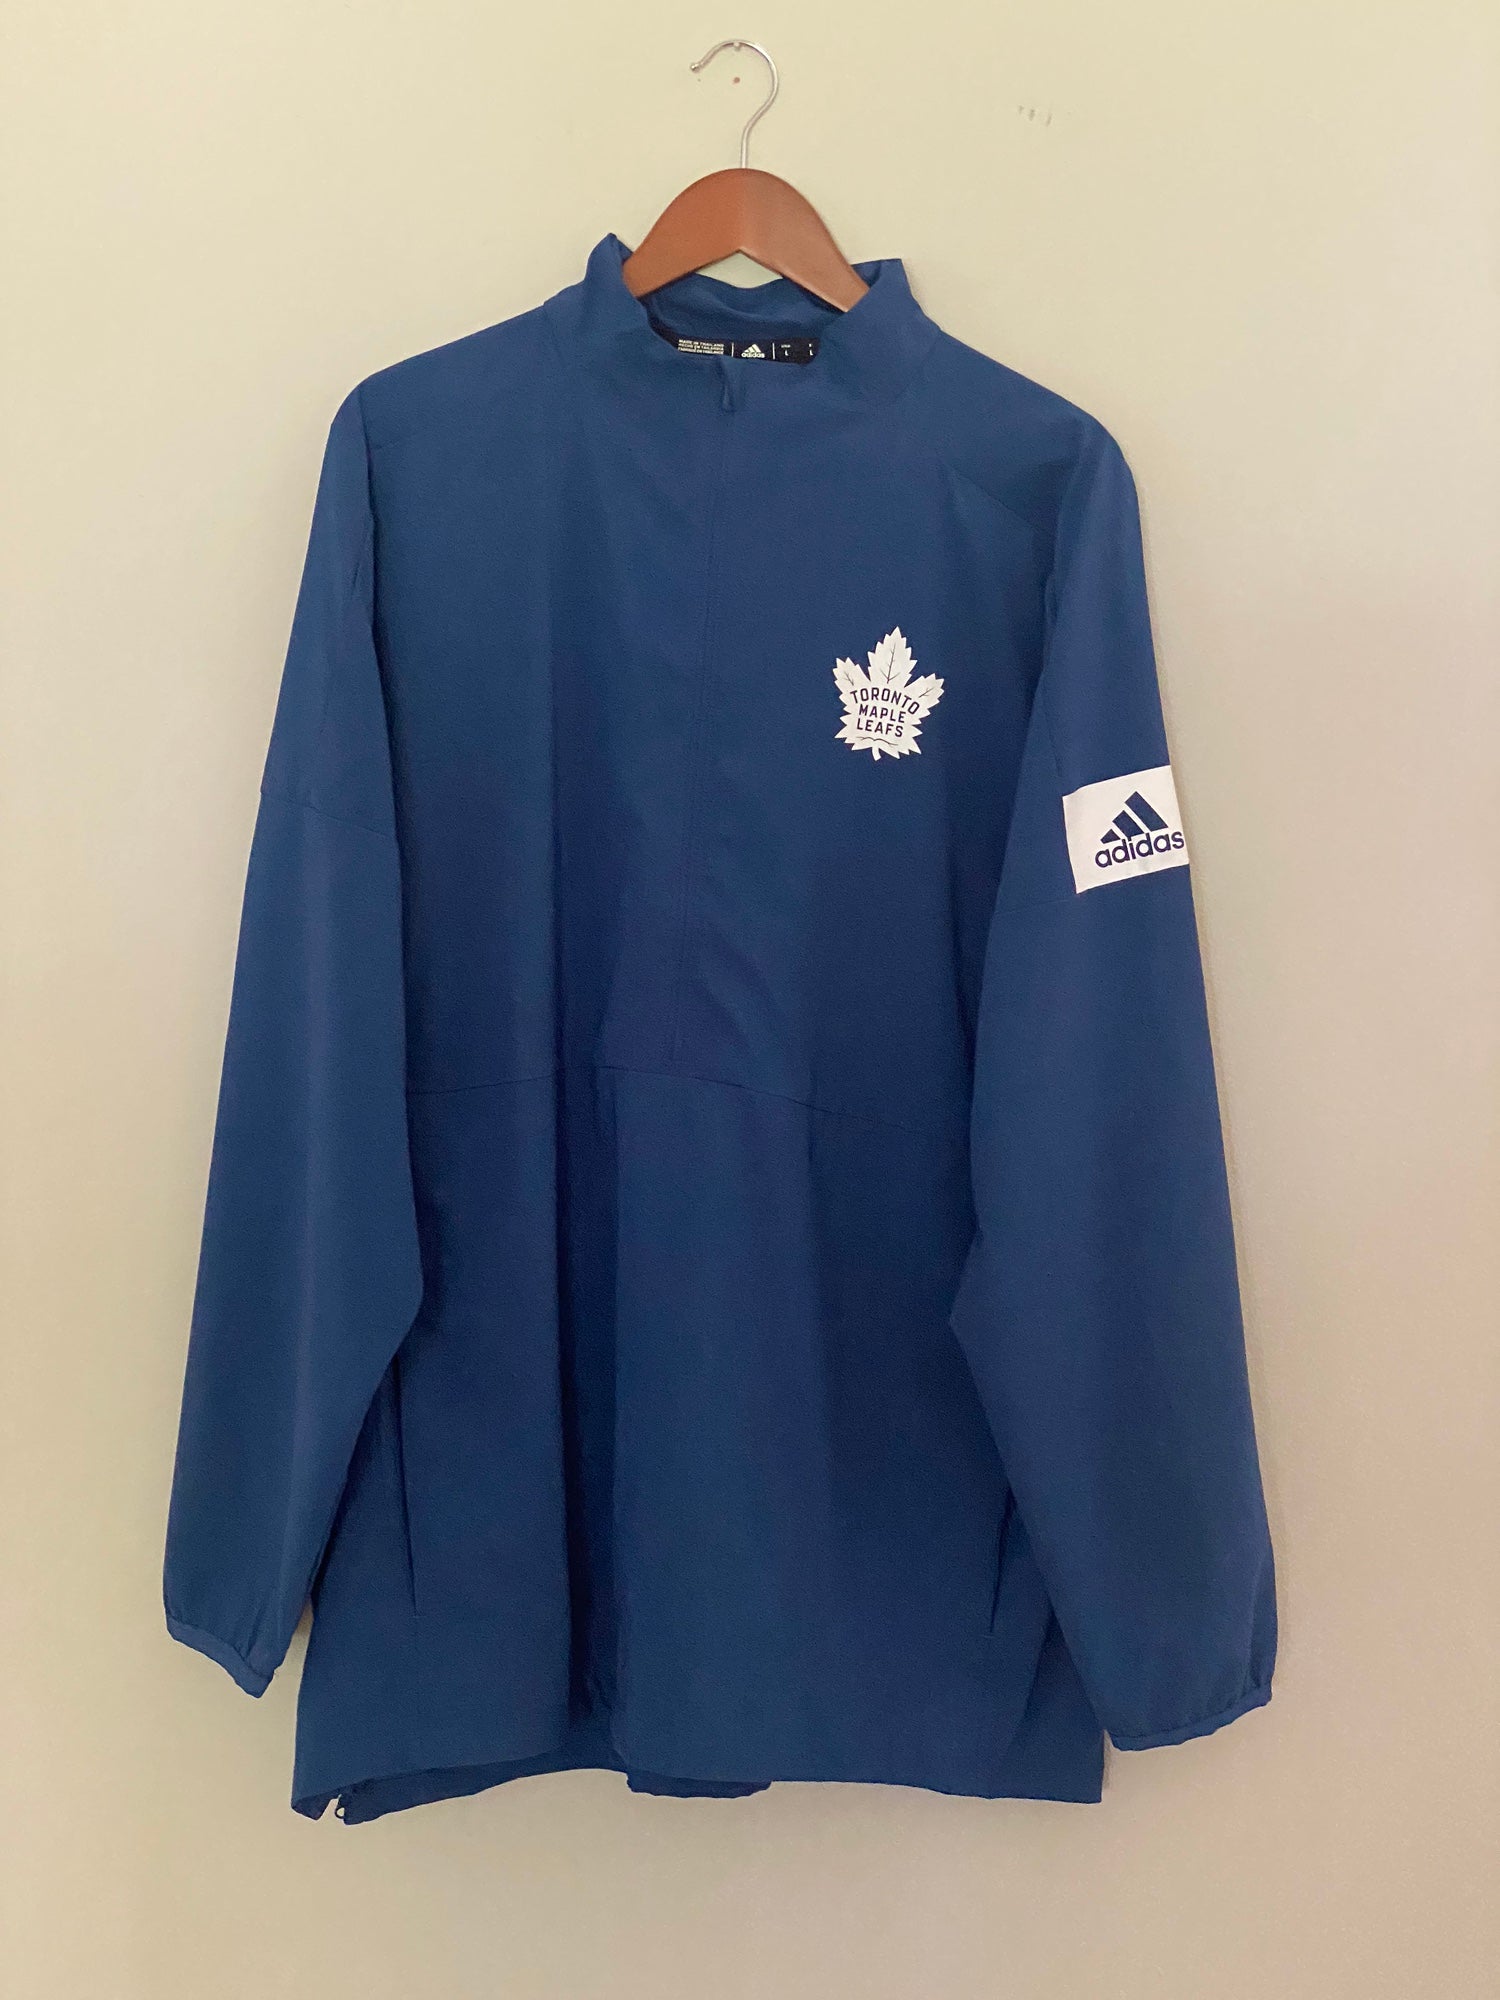 Men's adidas Blue Toronto Maple Leafs Game Mode Pullover Hoodie